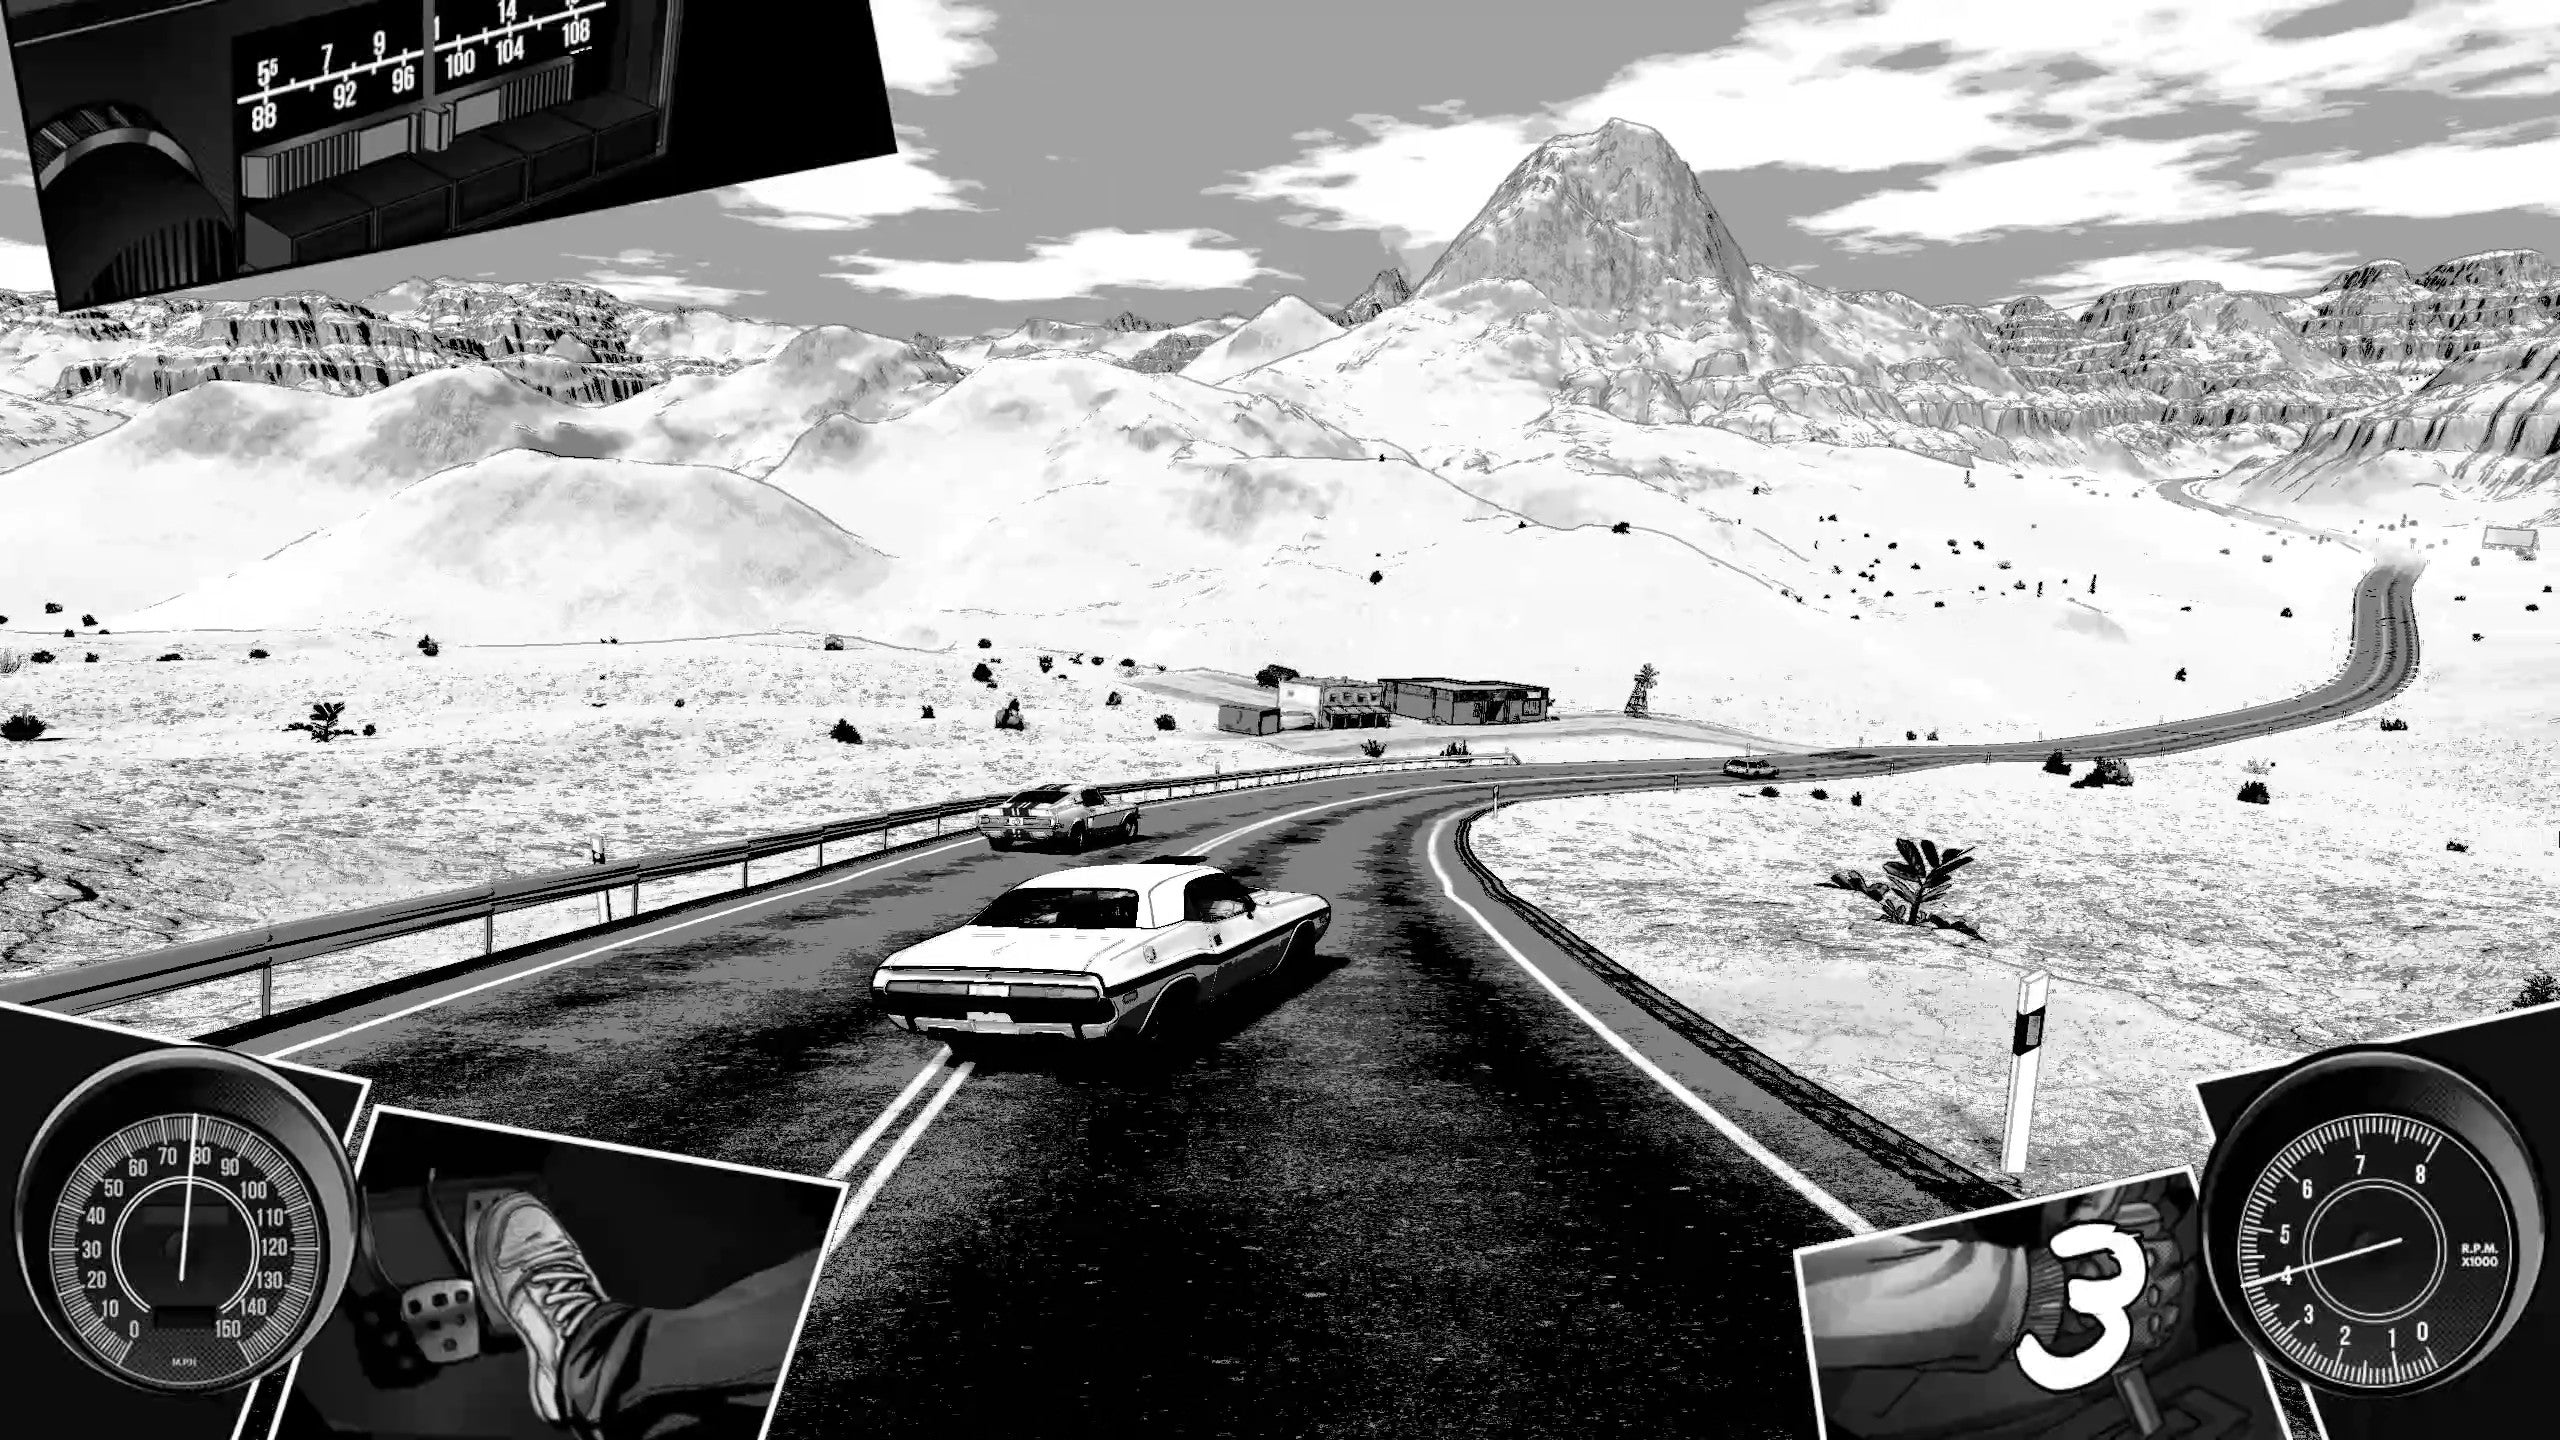 Heading Out - In all black and white a car swerves on a desert highway. Comic book style panels show the car's radio, odometer, pedals, and gear shift around the edges of the screen.